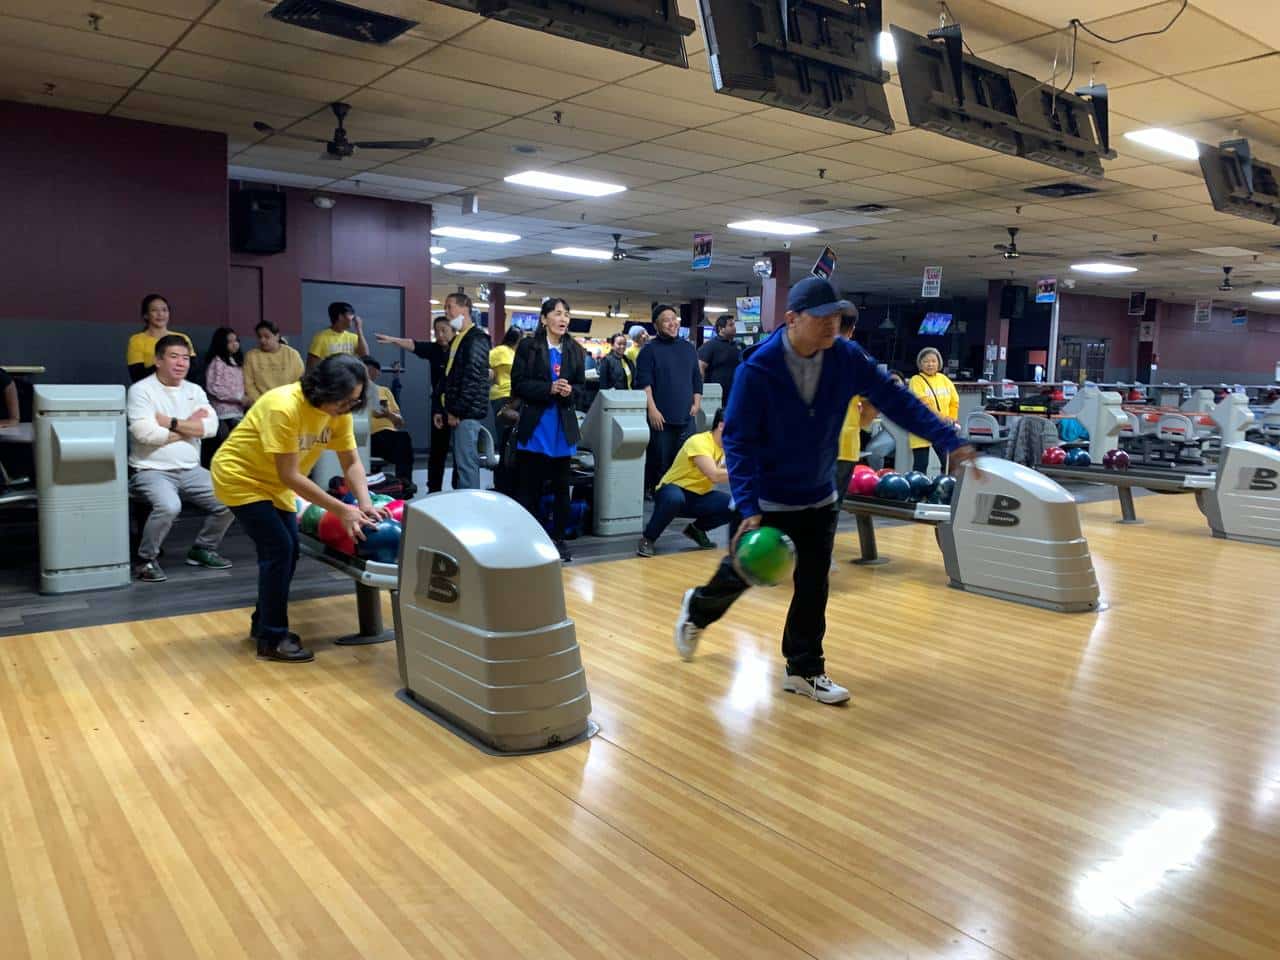 Bowling match brings together brethren in Bayonne, New Jersey